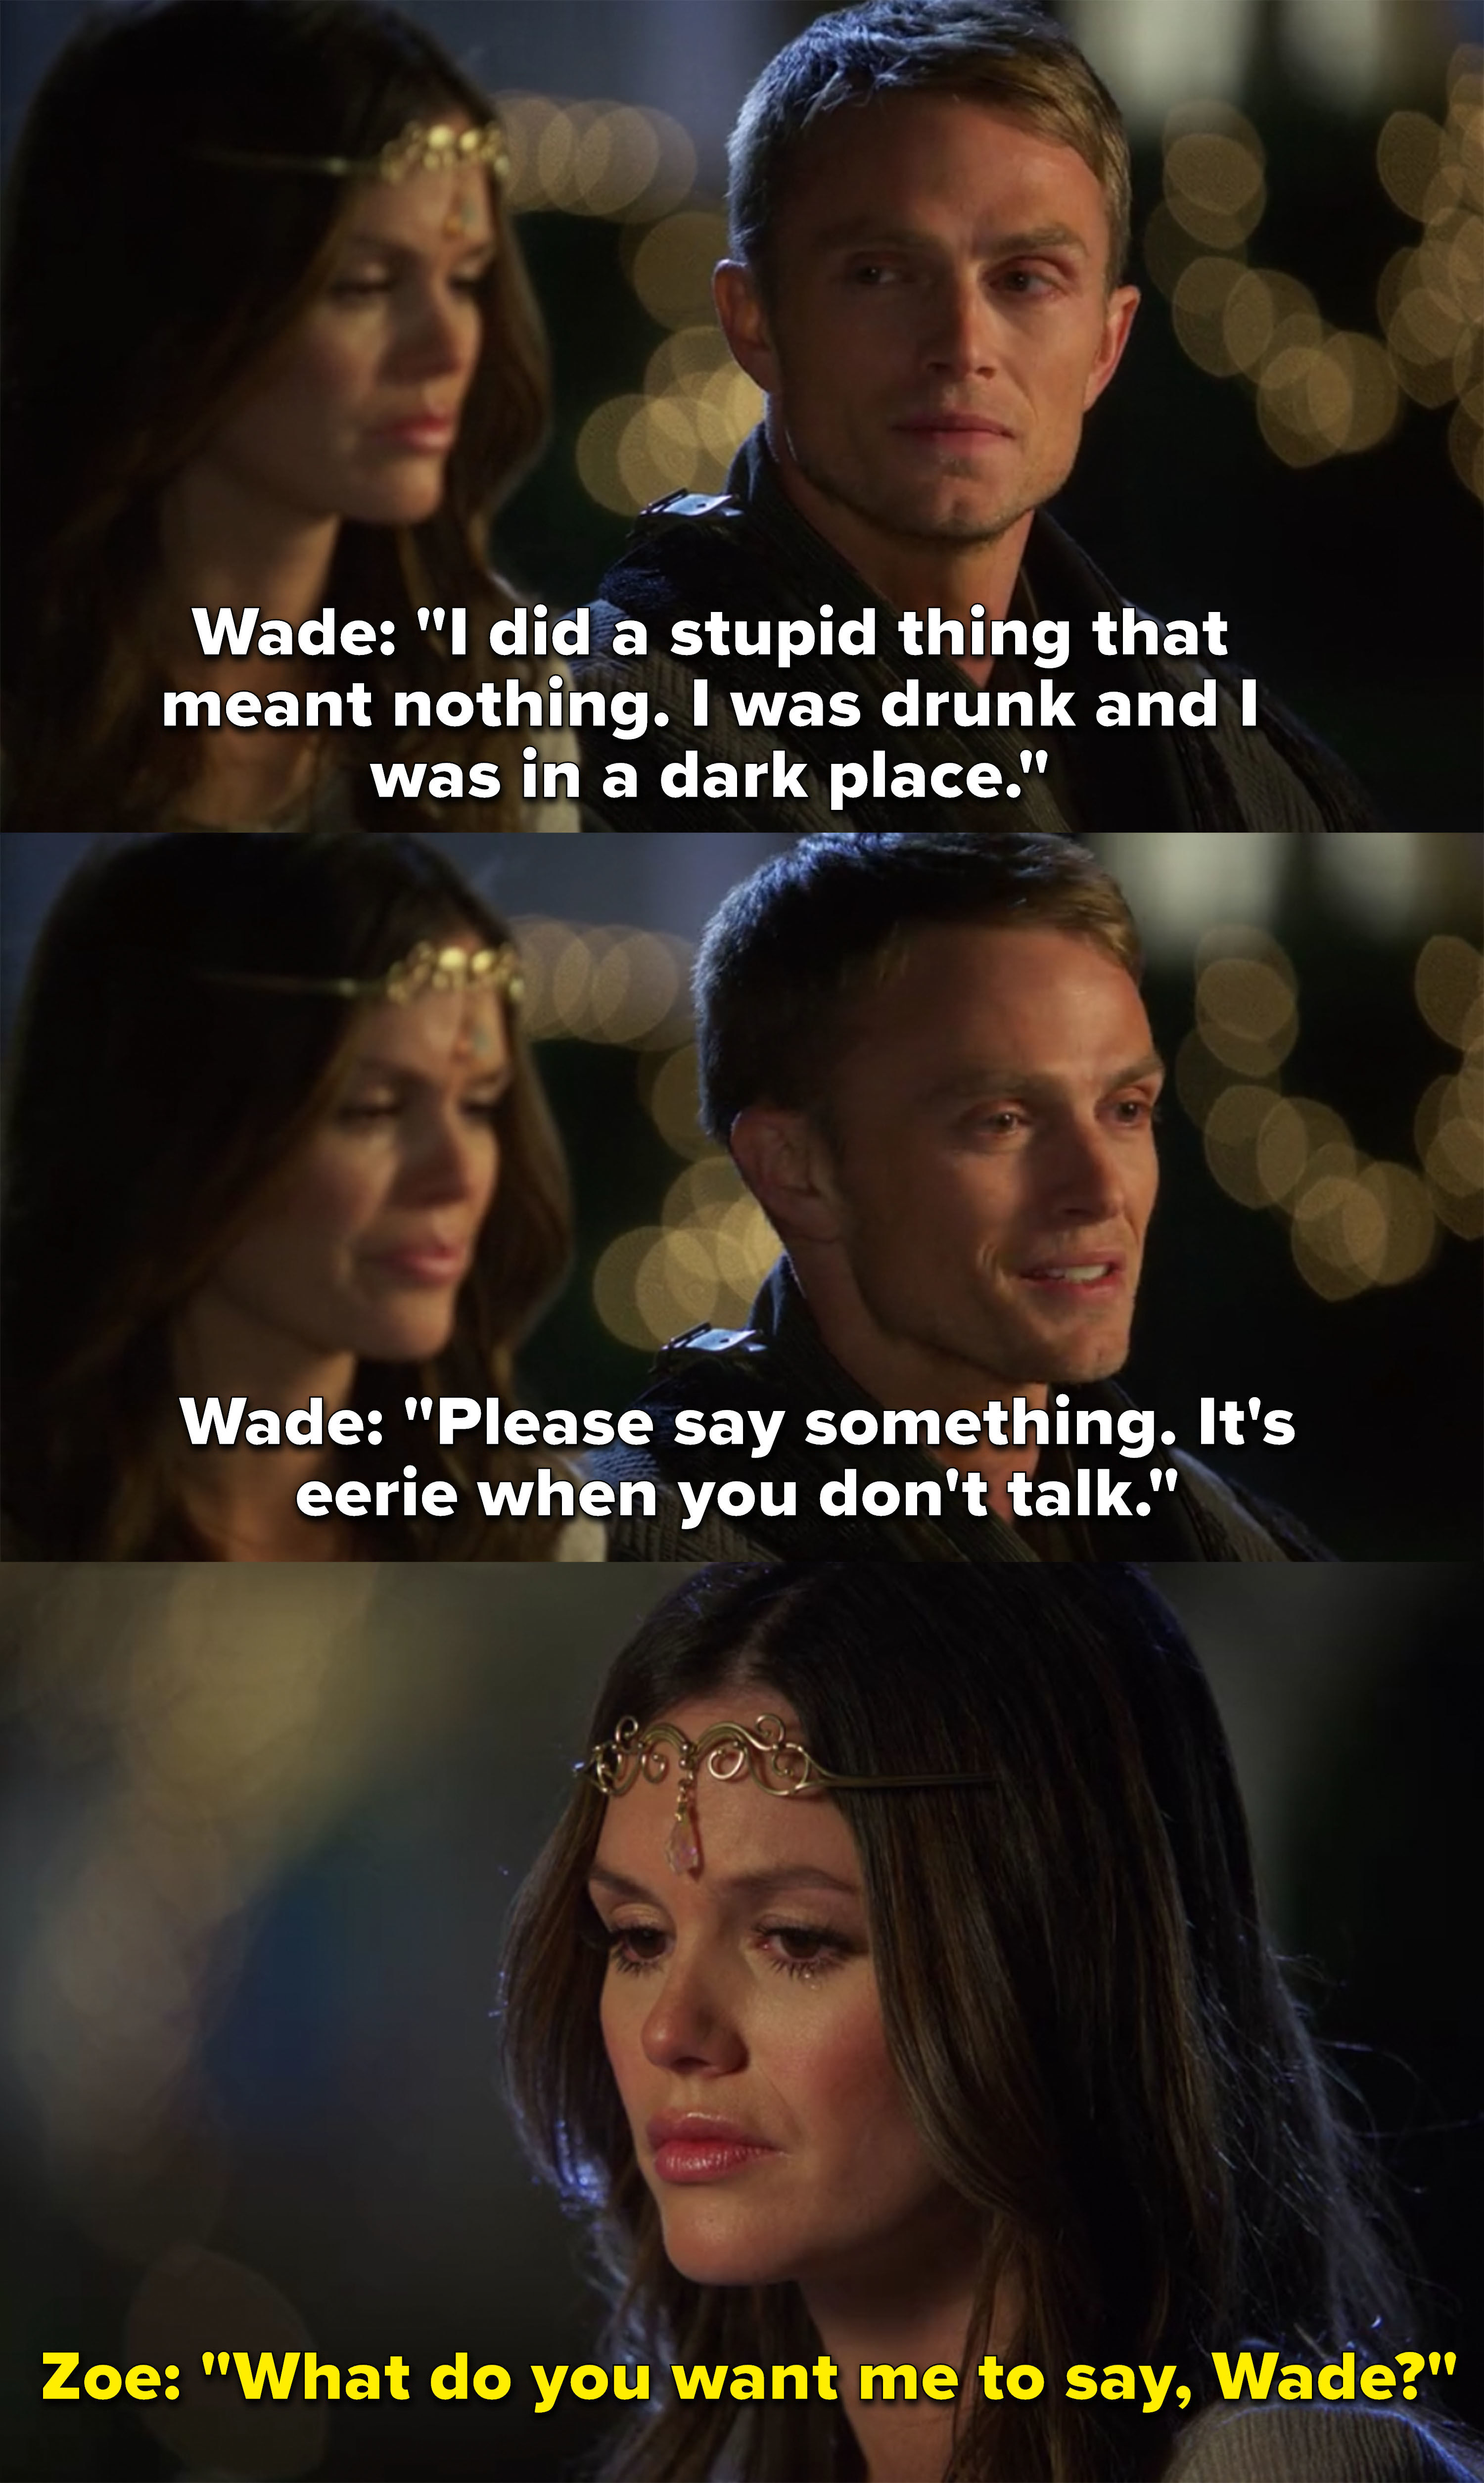 Wade says it meant nothing and asks Zoe to please say something, she responds, &quot;What do you want me to say?&quot;